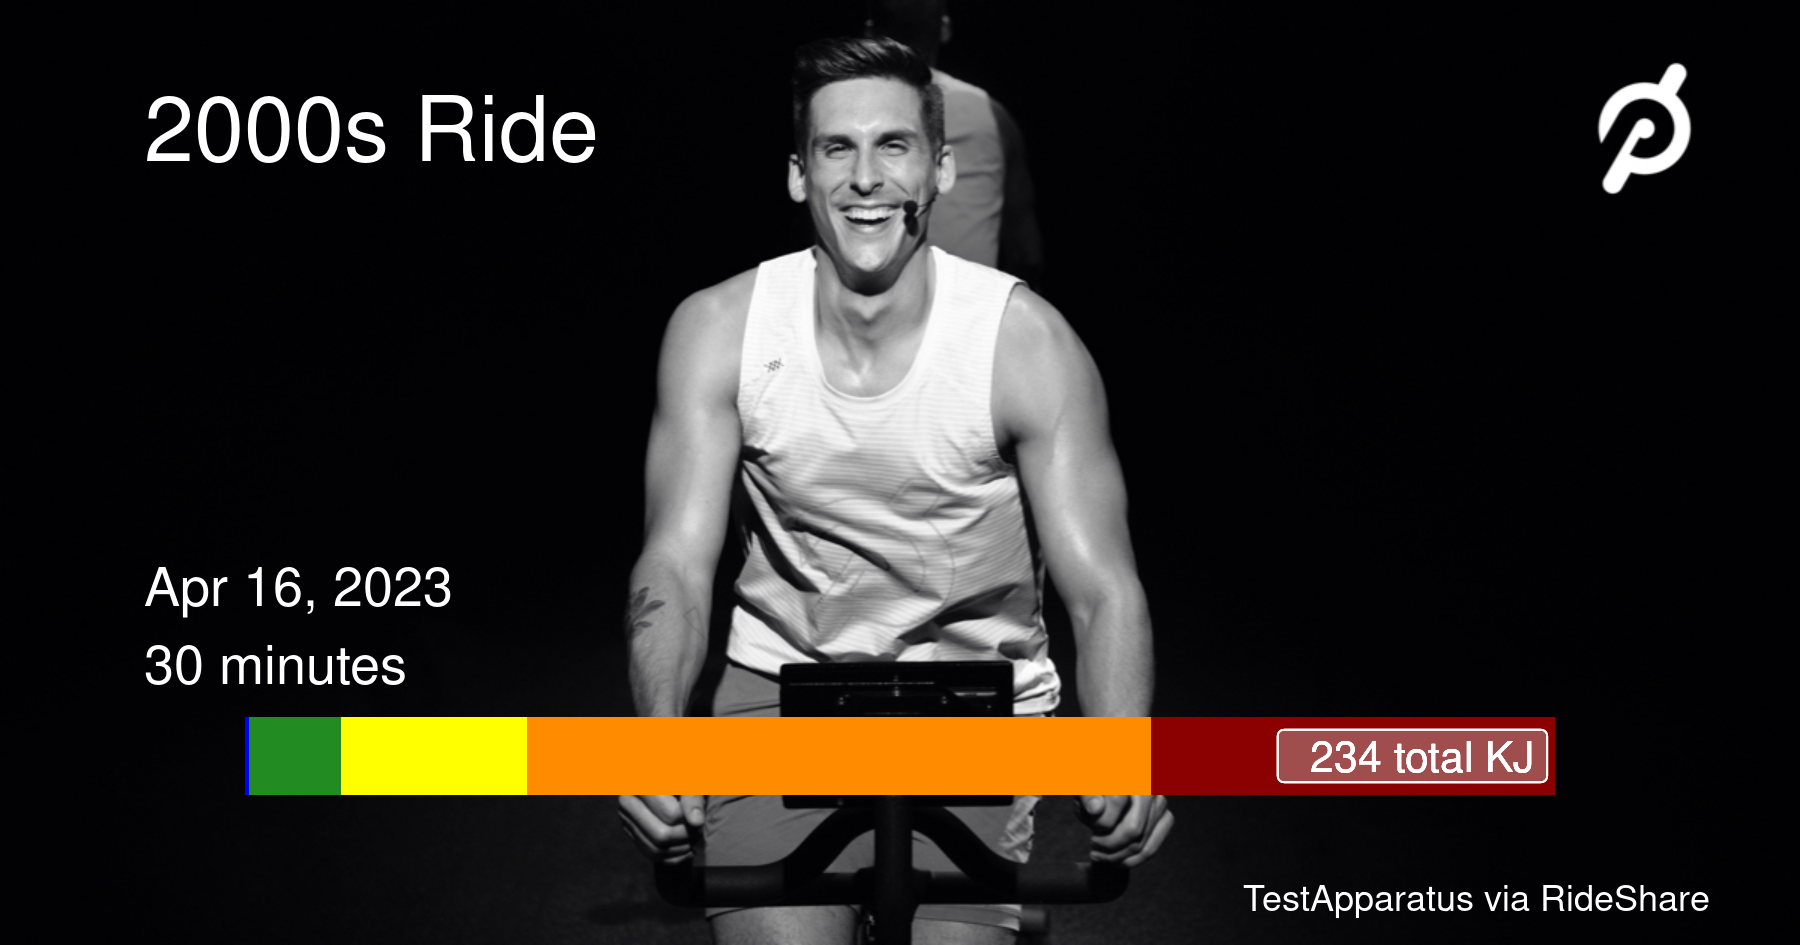 Peloton instructor Cody Rigsby standing in a bicycle and smiling, in the background of text describing a ride. The ride is titled 2000s Ride and shows a graph of time in different heart rate zones. 